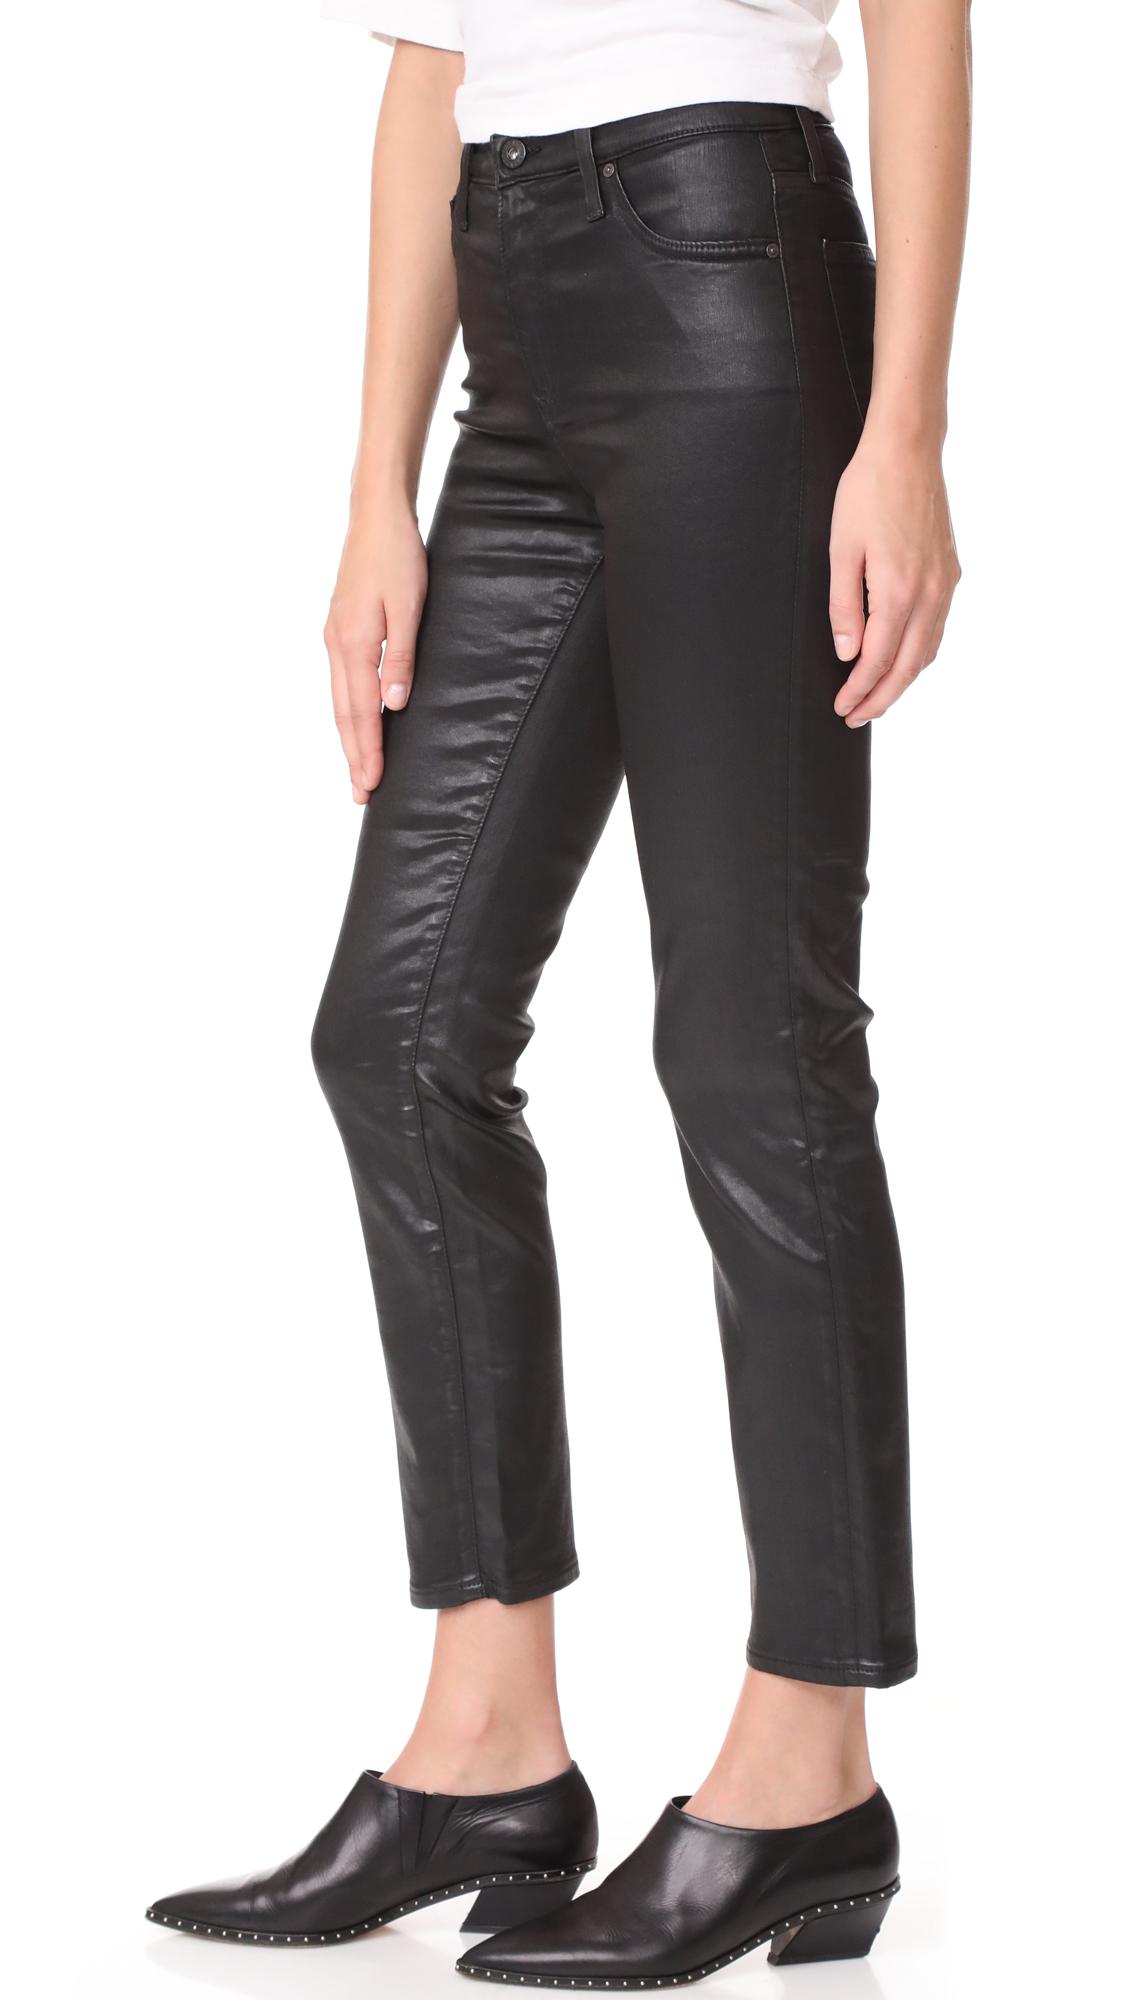 Lyst - Ag Jeans The Isabelle Jeans in Black